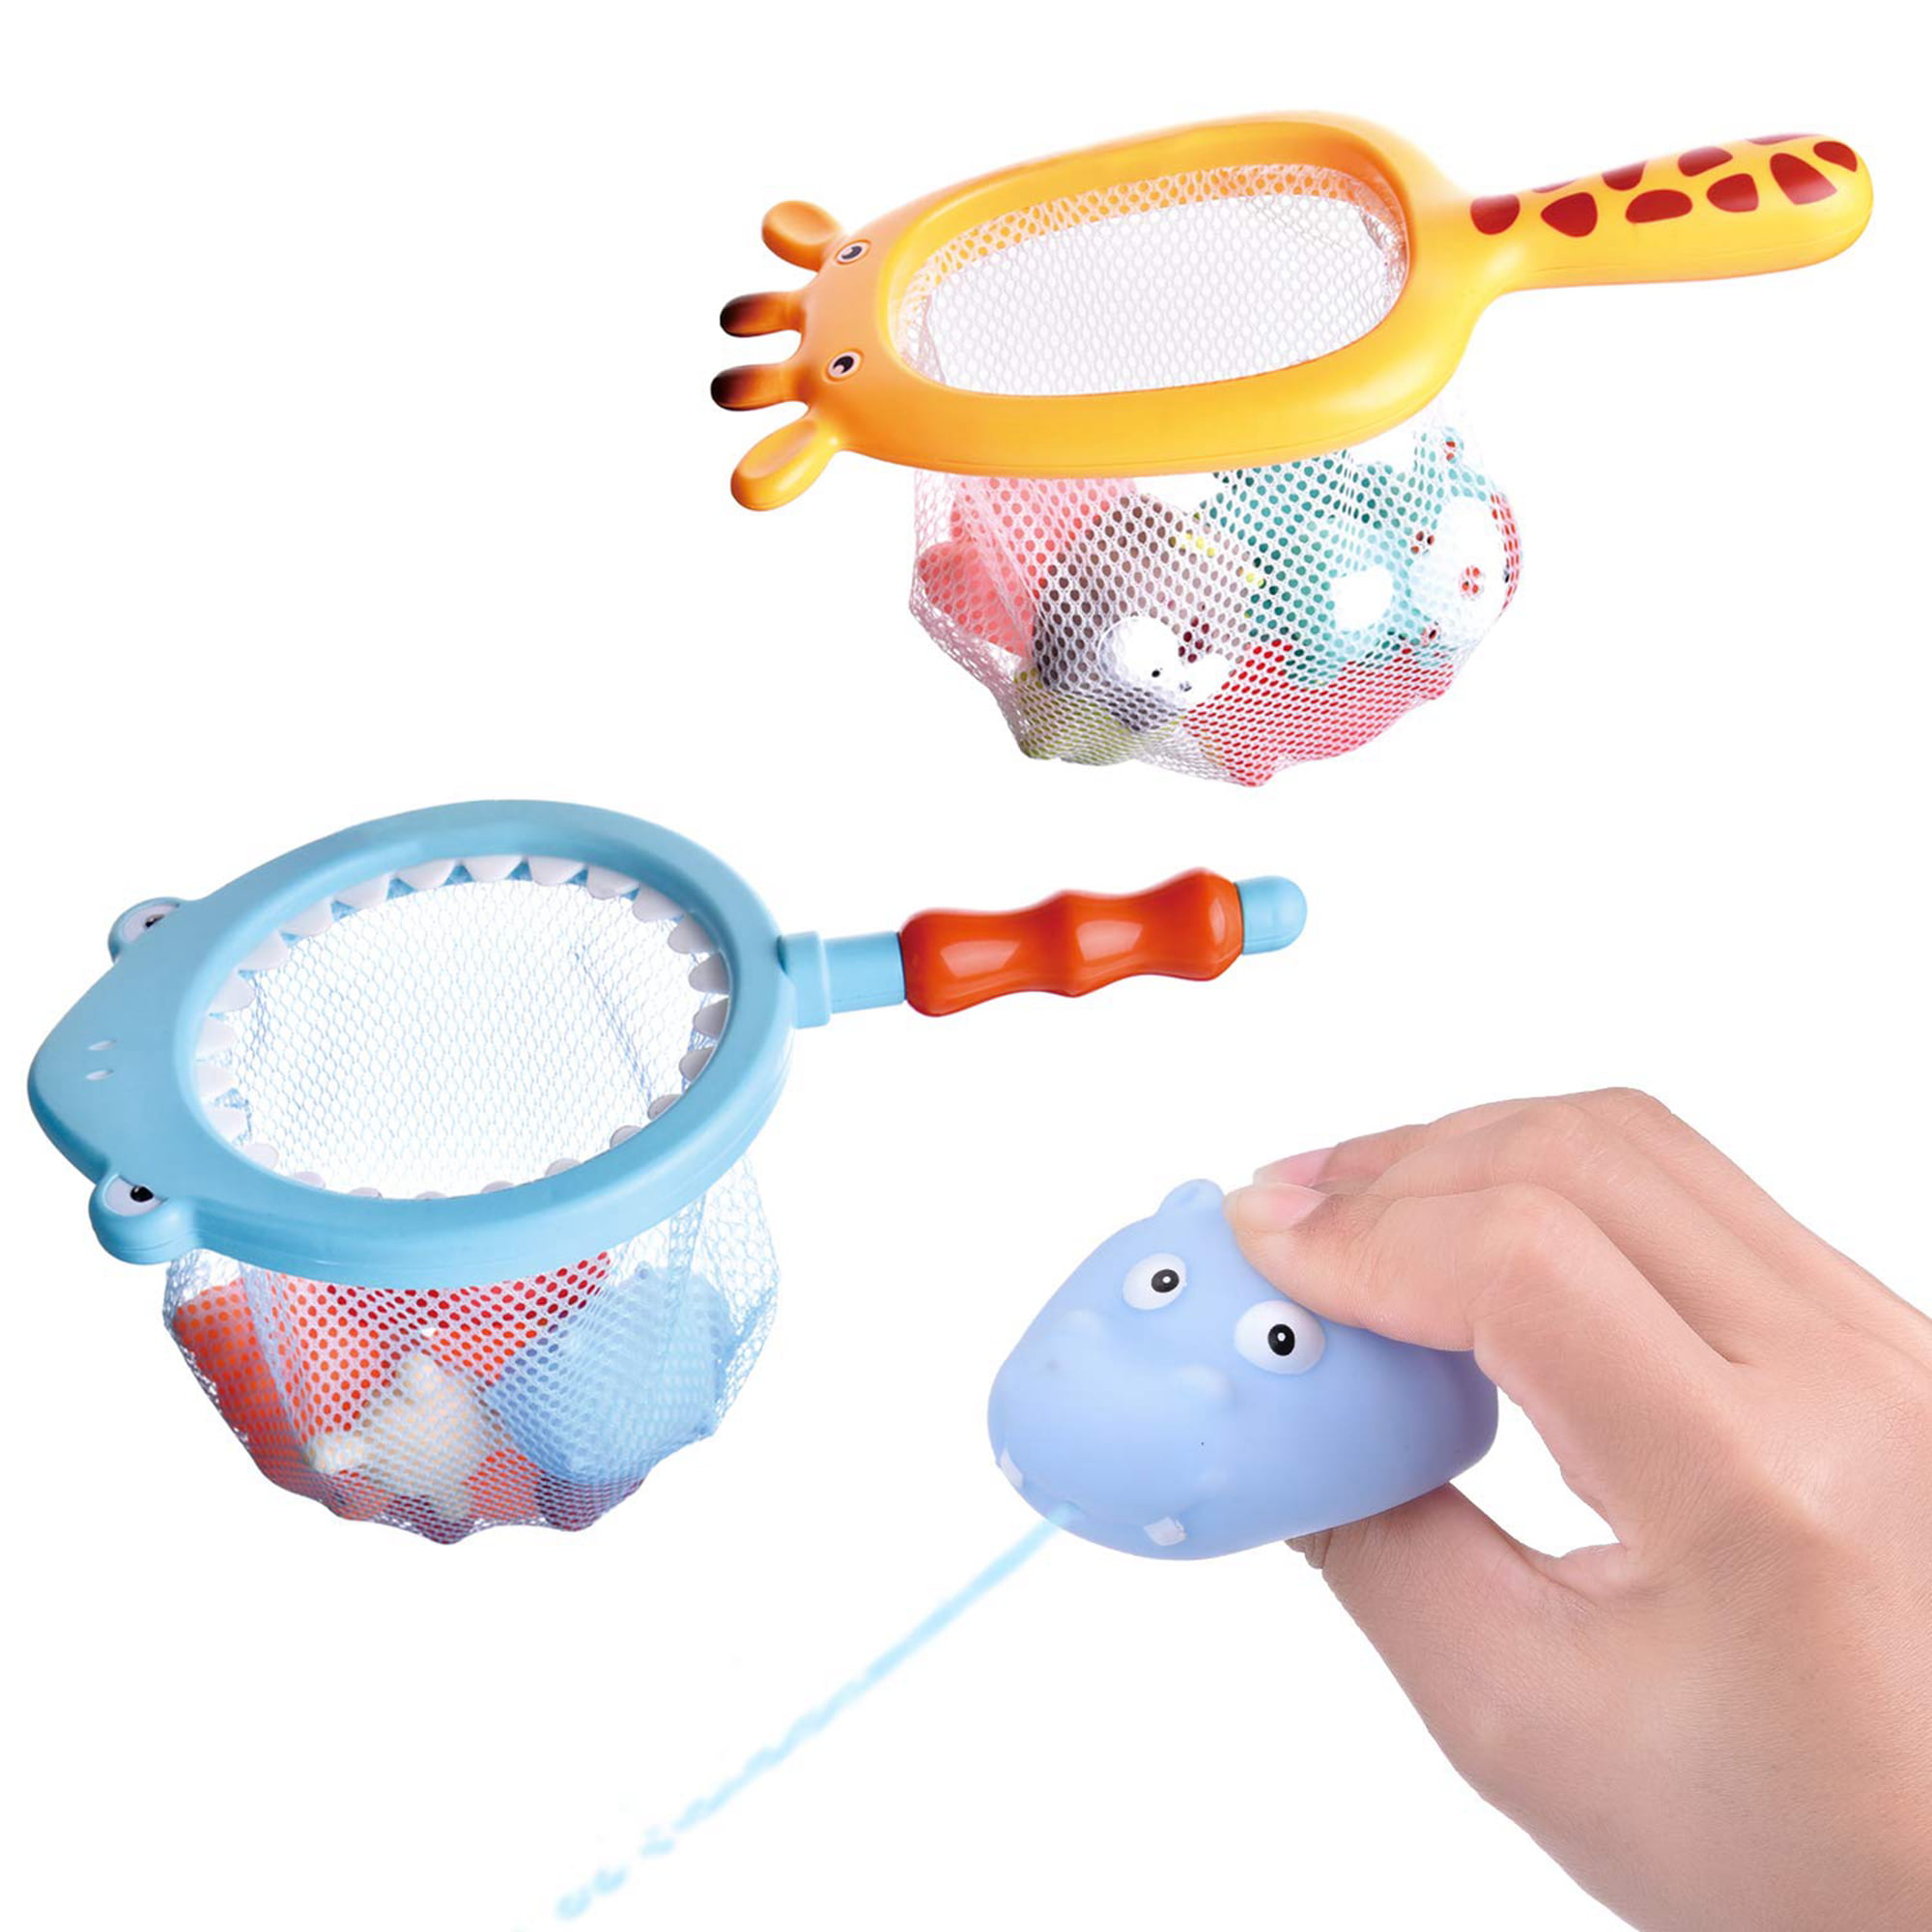 Marine Animals Squirters and Floaties-Learning & Education Bathtub Toys for Babys-Induction Water Temperature Nrbecurn Baby Bath Fun Toys Marine Animals&Fishing net 